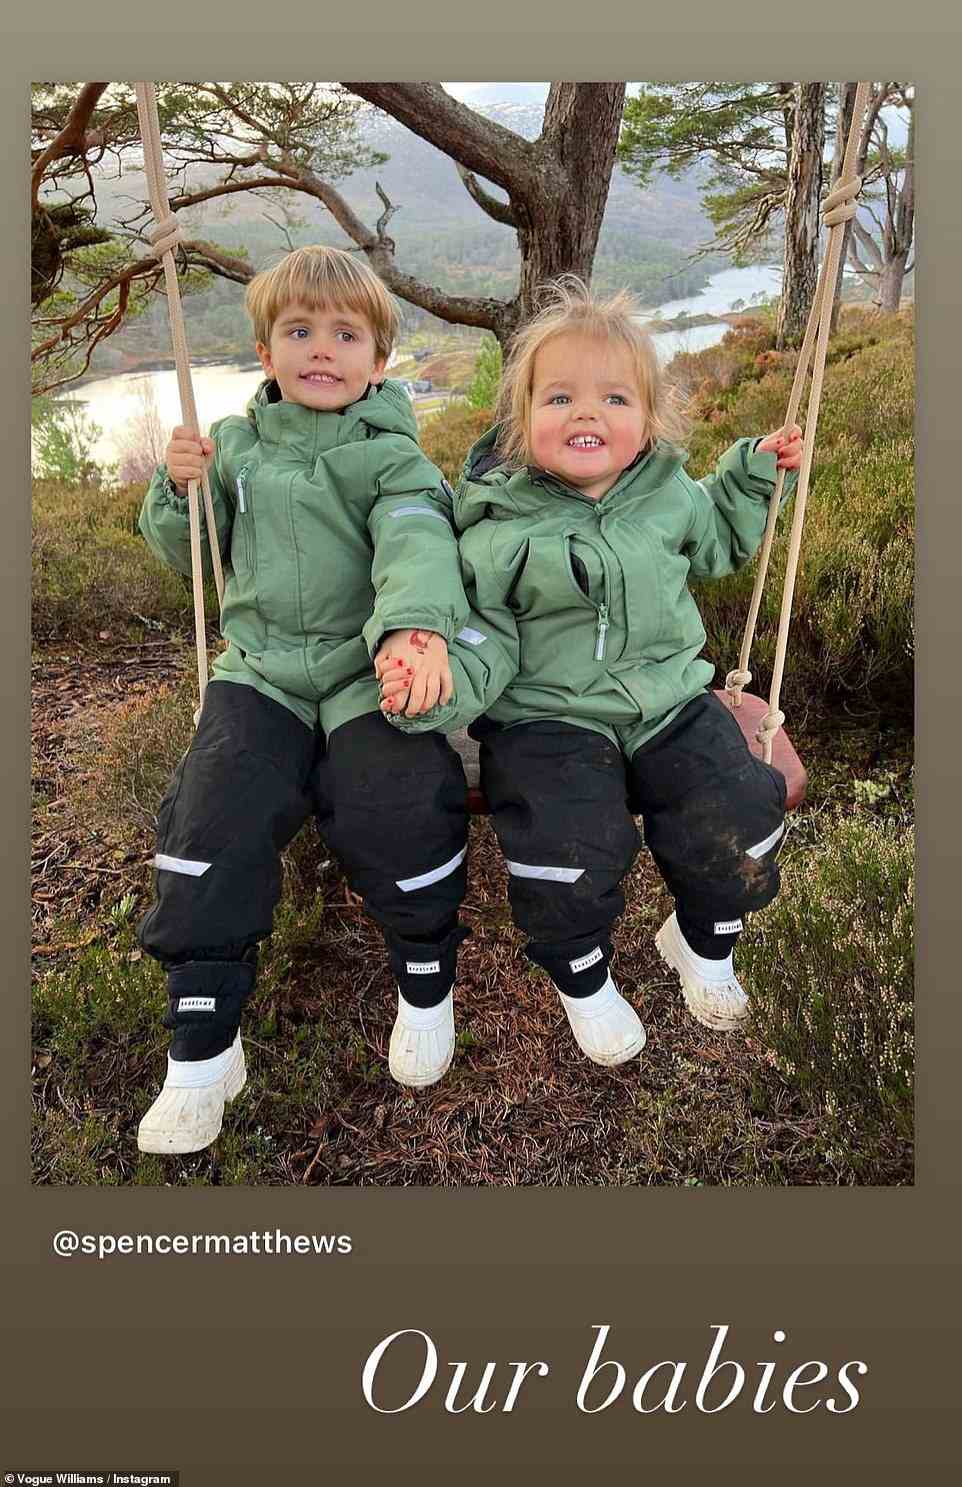 'Our babies' The couple's adorable children held hands while swinging together as they got some fresh air on Christmas morning